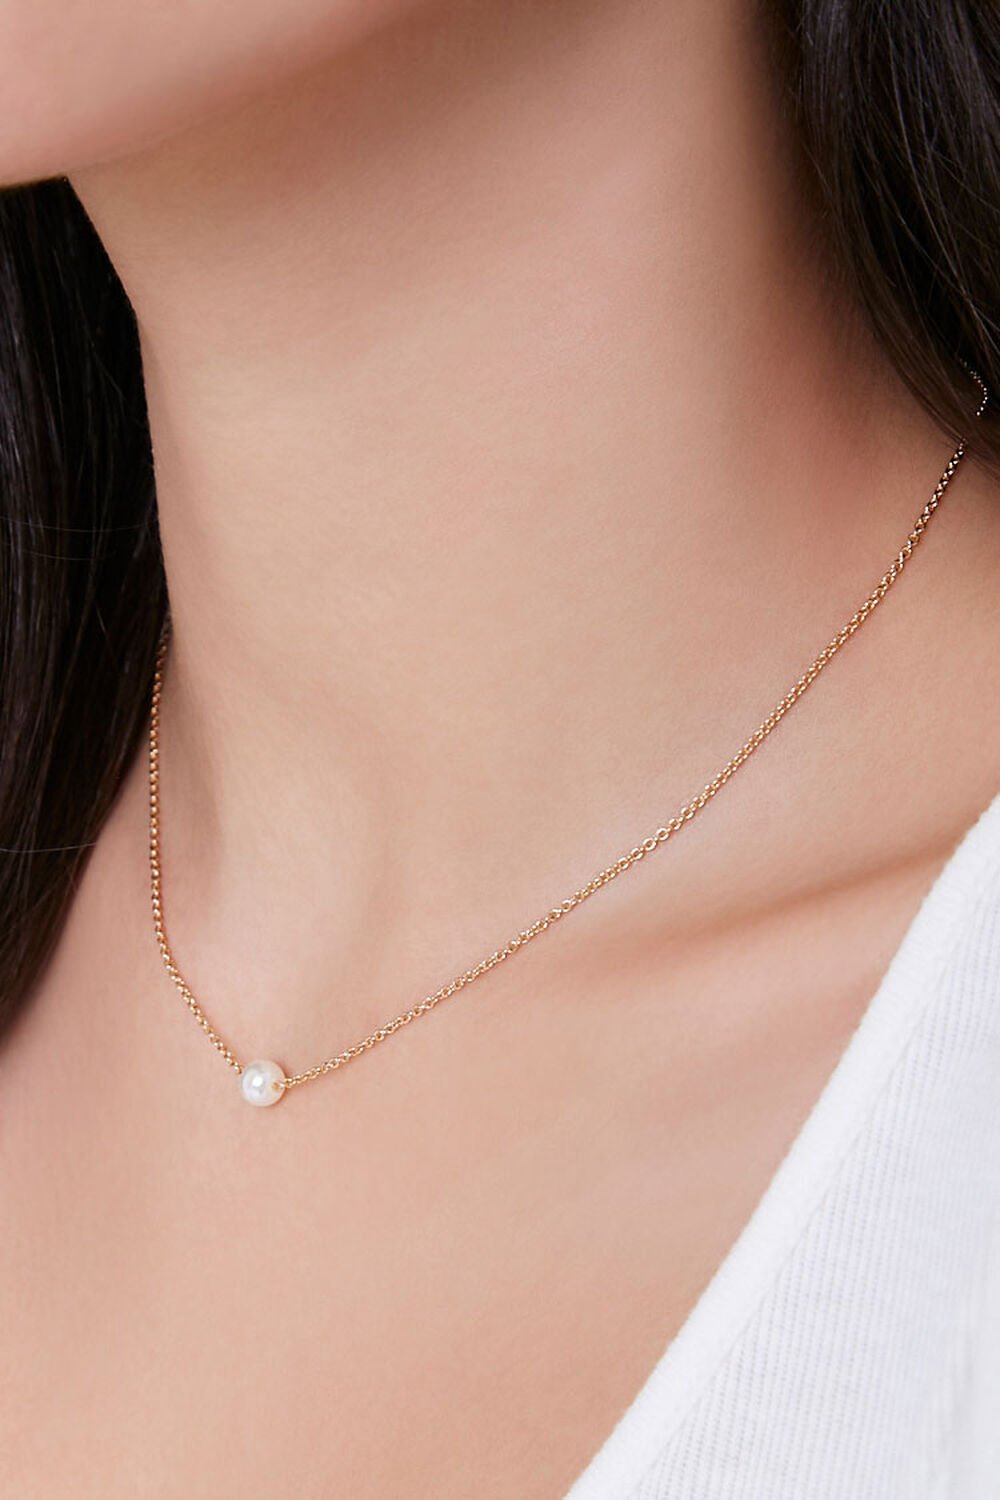 GOLD/CREAM Faux Pearl Charm Necklace, image 1